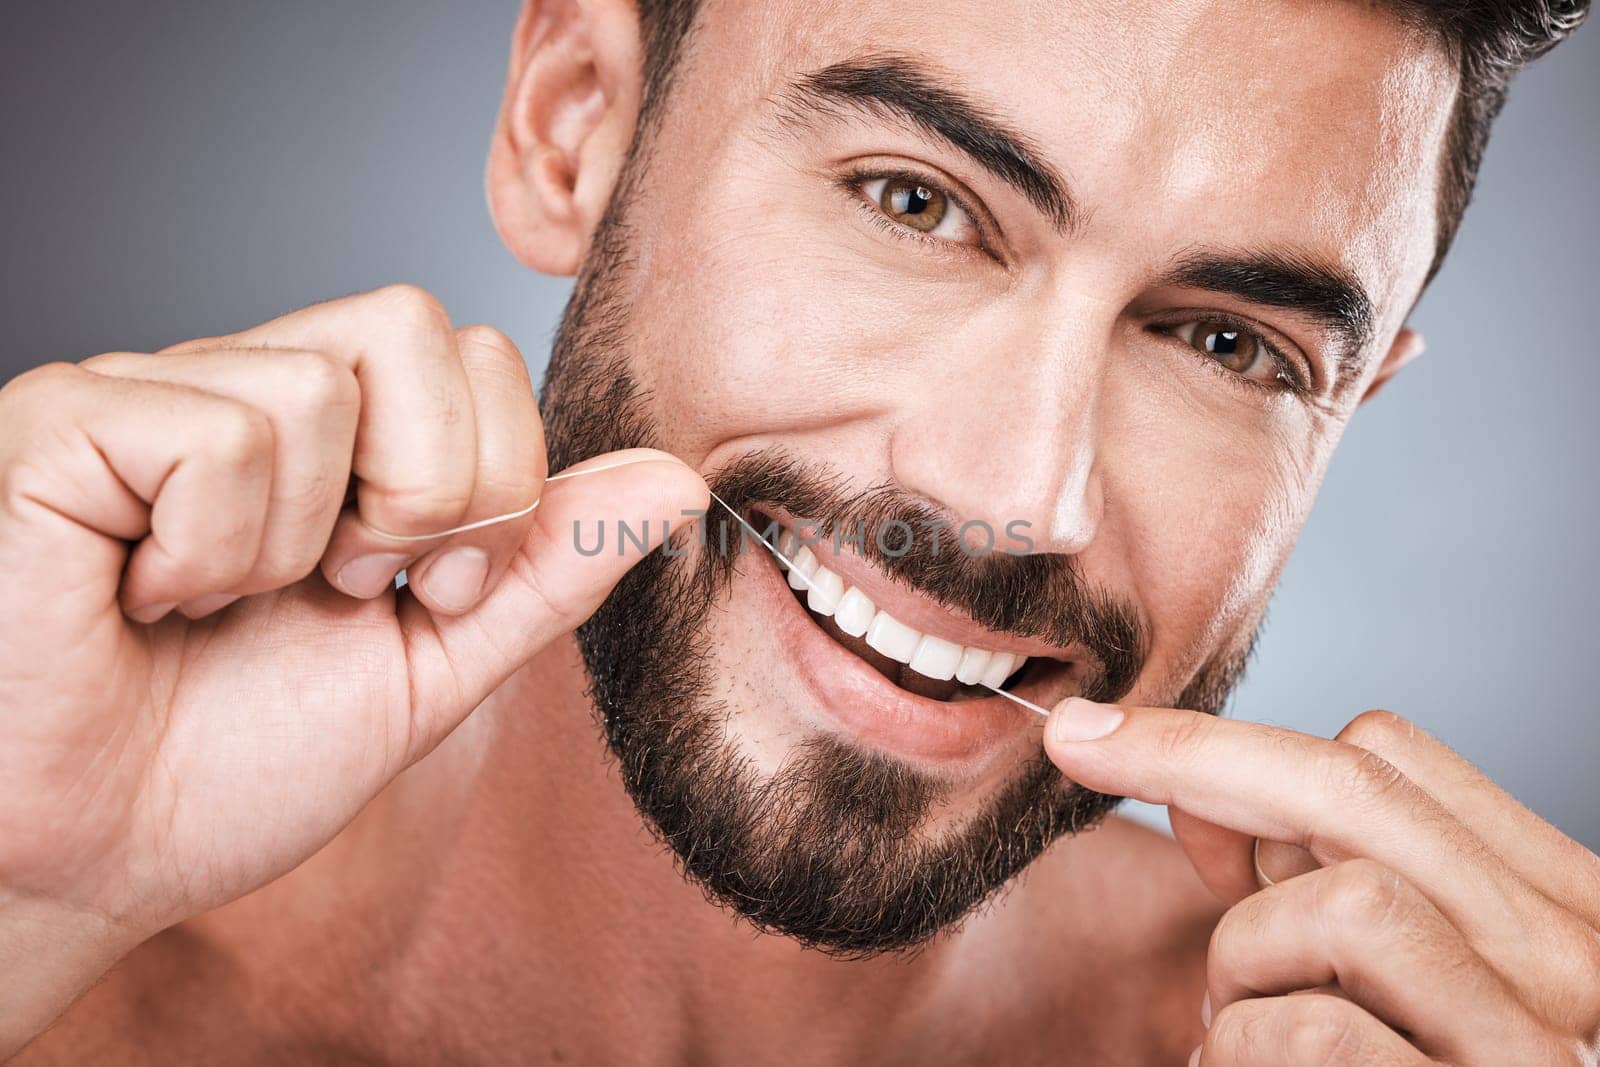 Floss, cleaning teeth and portrait of man in studio for beauty, healthy body and hygiene on background. Male model, tooth flossing and mouth for facial smile, fresh breath and happy dental wellness by YuriArcurs